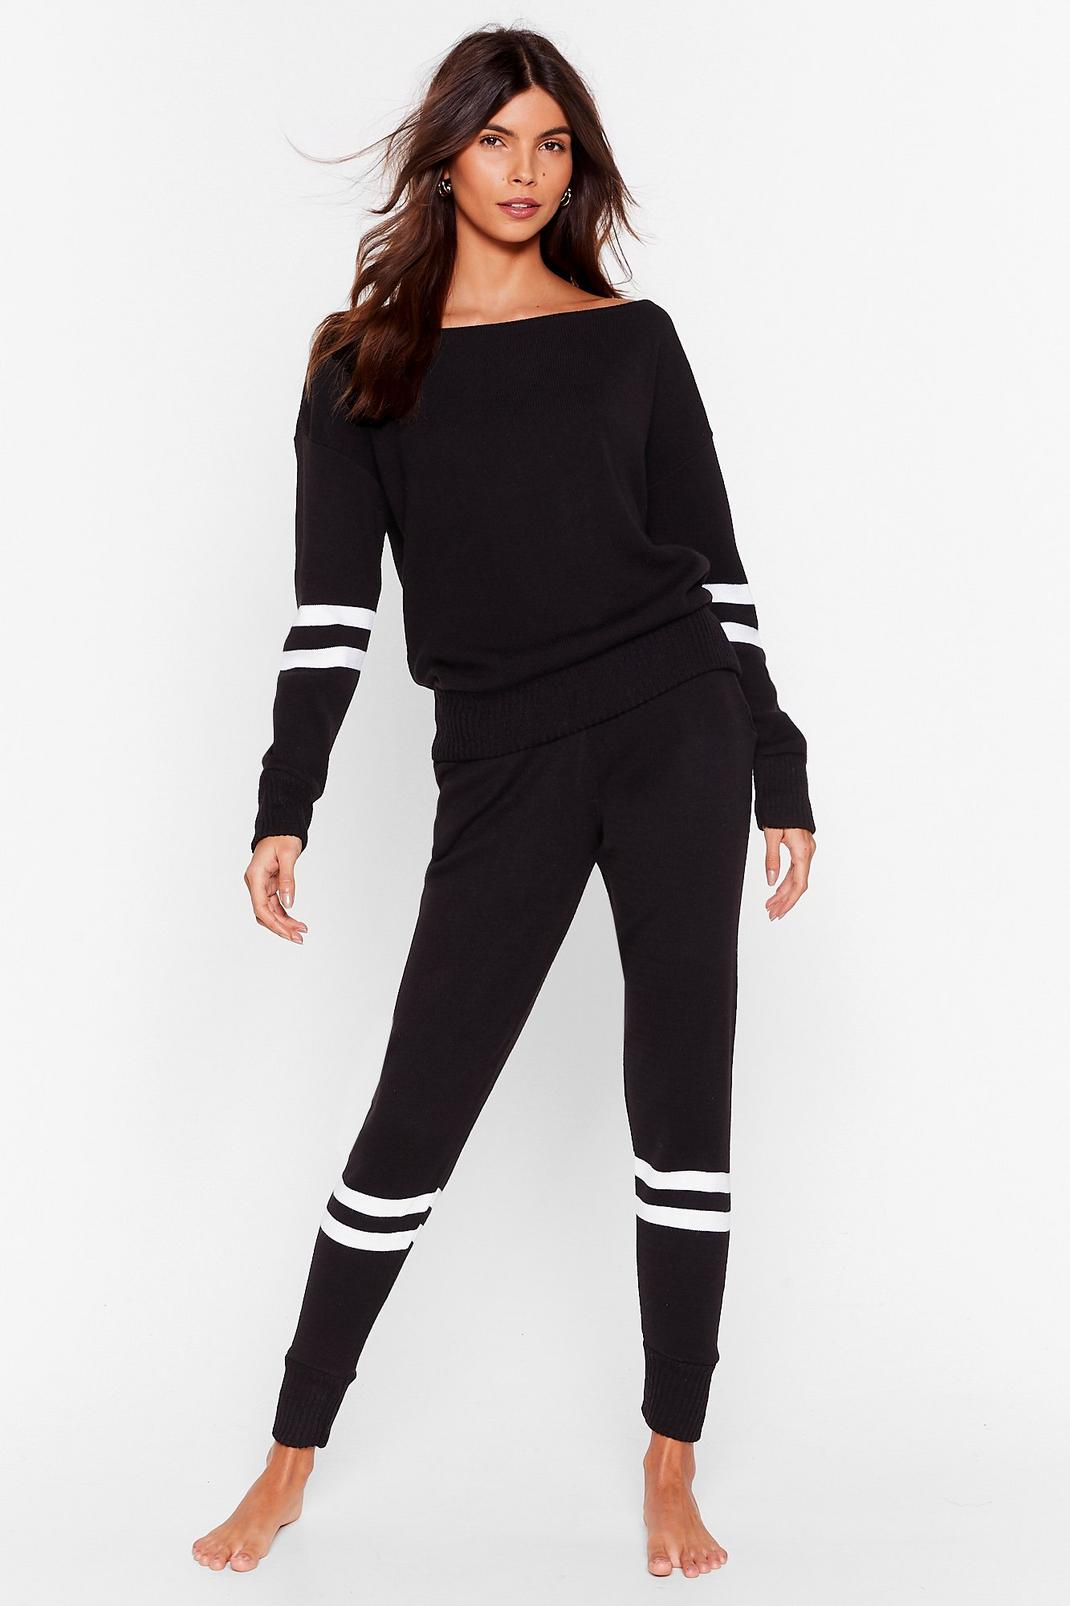 Call Time Striped Jumper and Jogger Lounge Set image number 1